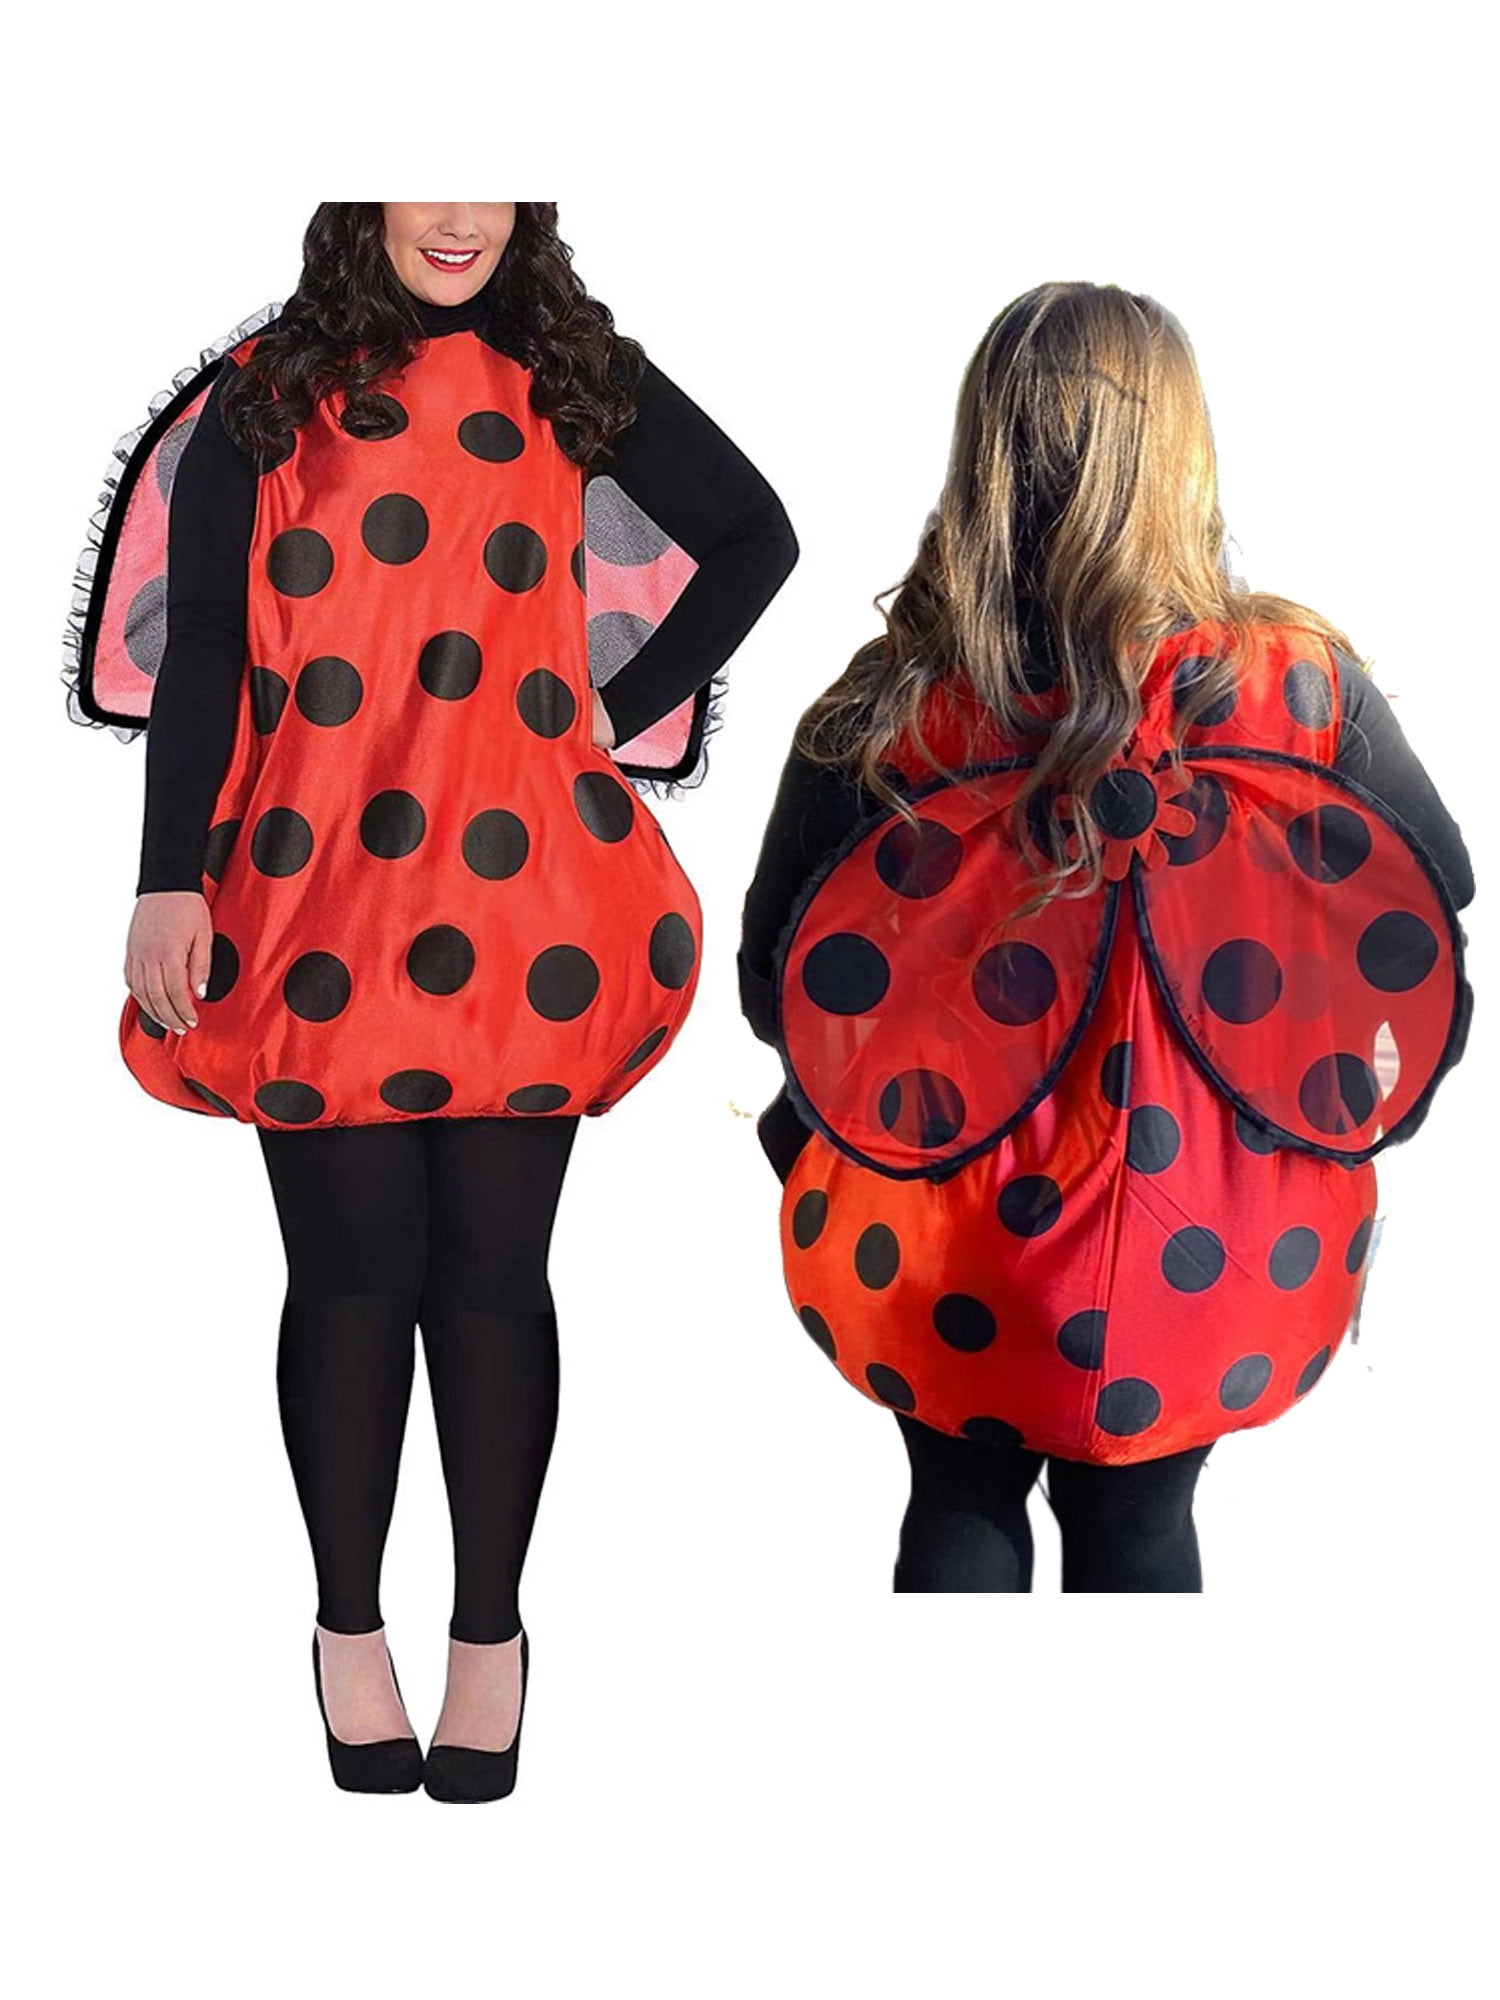 Janmercy Ladybug Wings Costume Kit for Women Kids Halloween Ladybird Girls  Adults Cosplay Accessories for Dress up Party